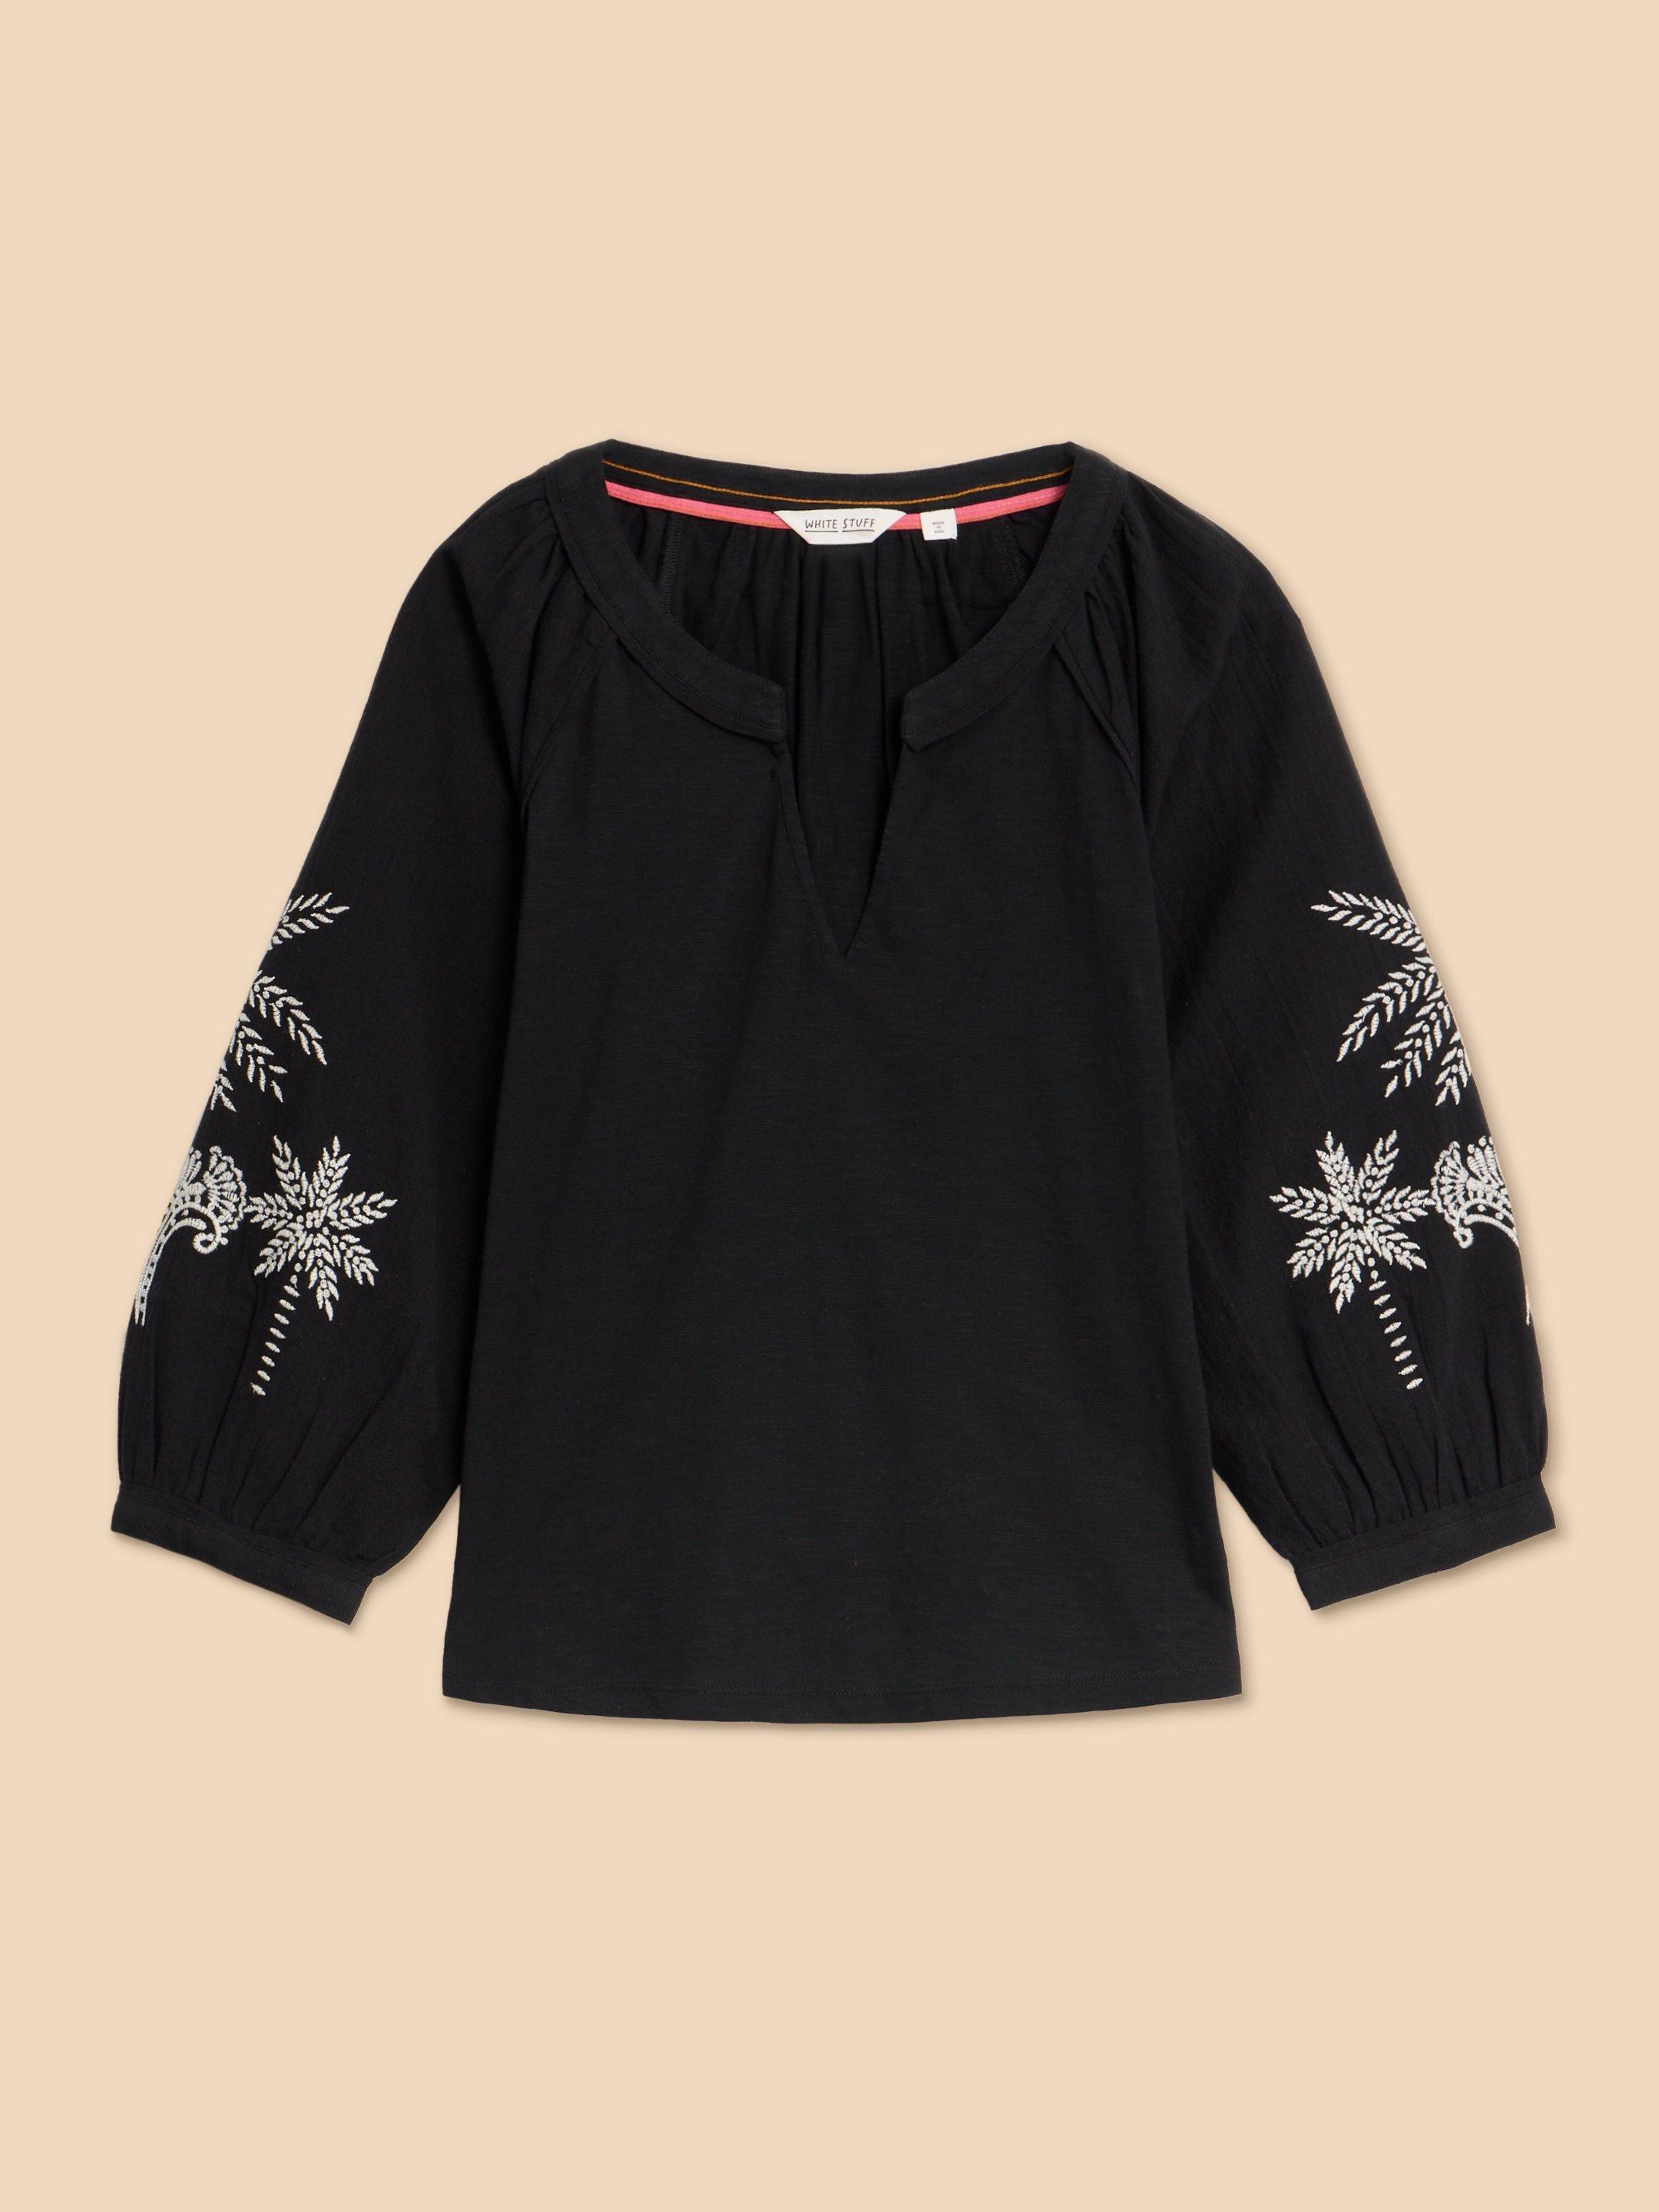 MILLIE MIX EMBROIDERED TOP in BLK MLT - FLAT FRONT